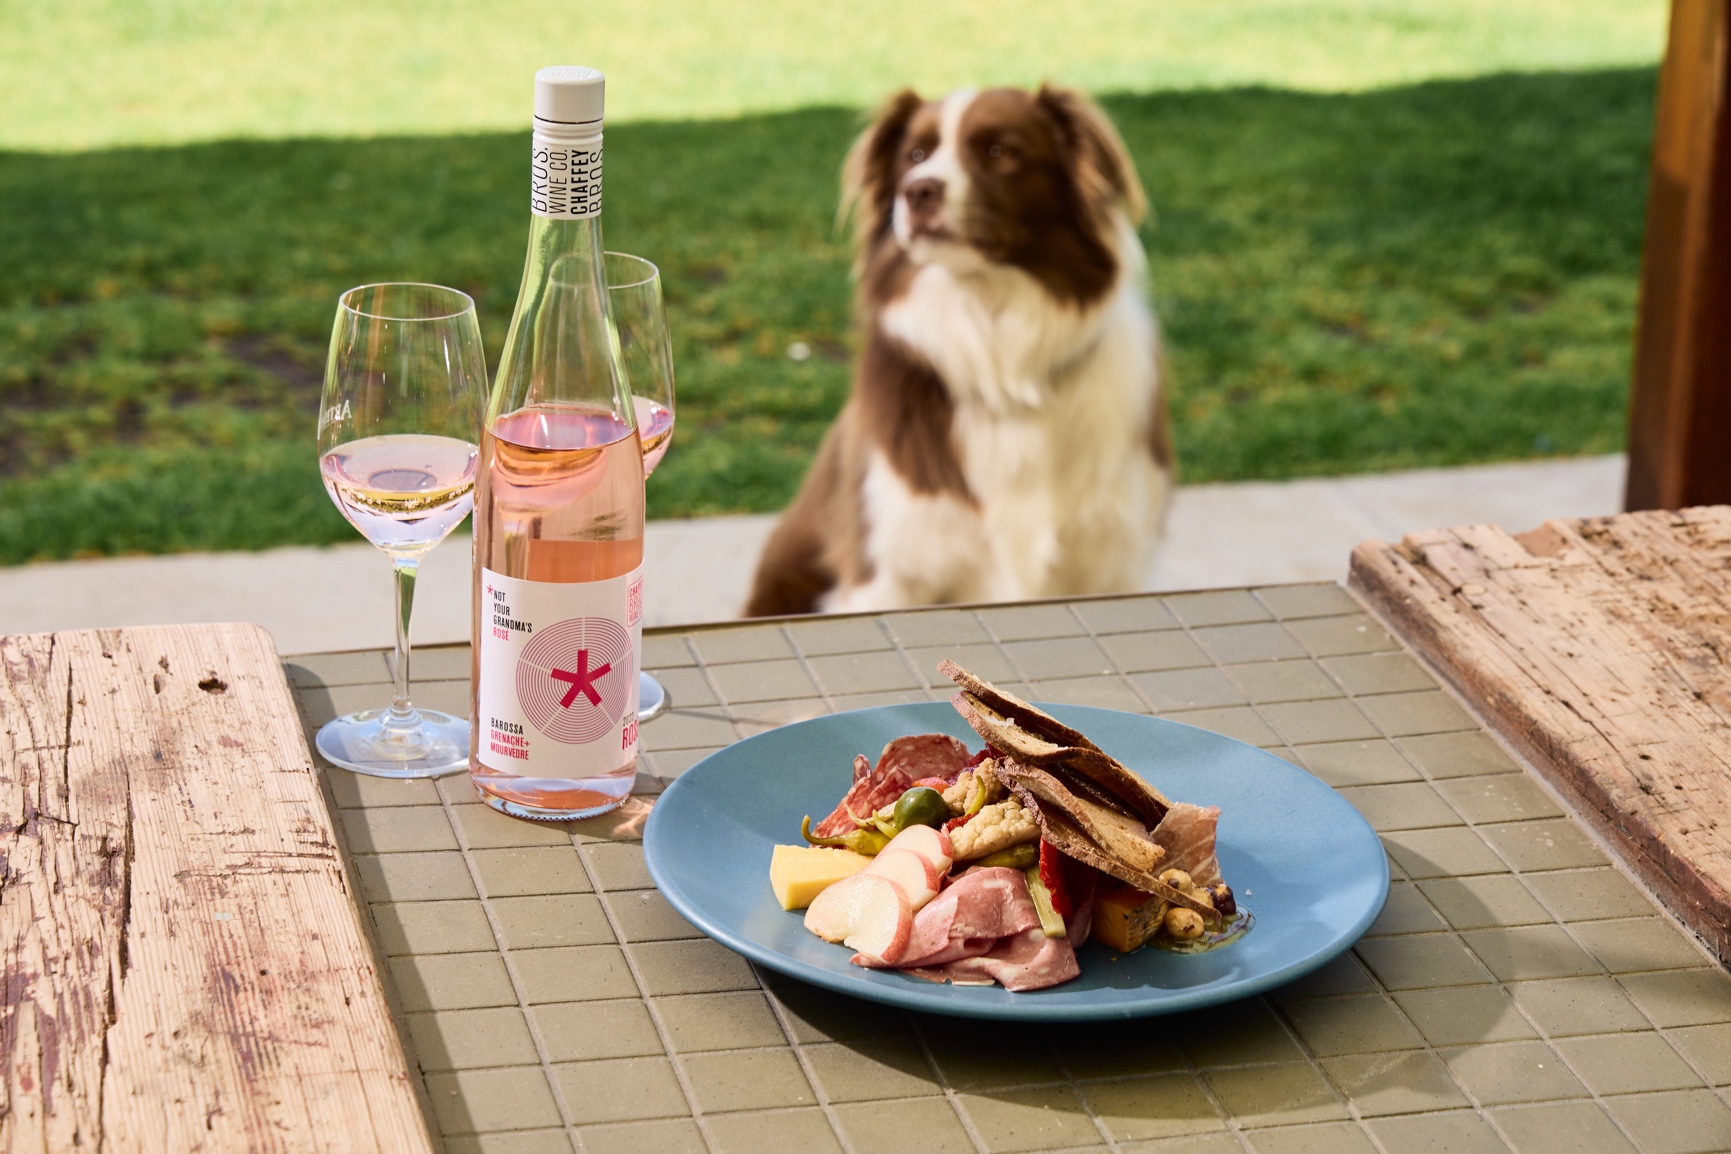 WIN a Lunch and Rosé Tasting at Artisans of Barossa!